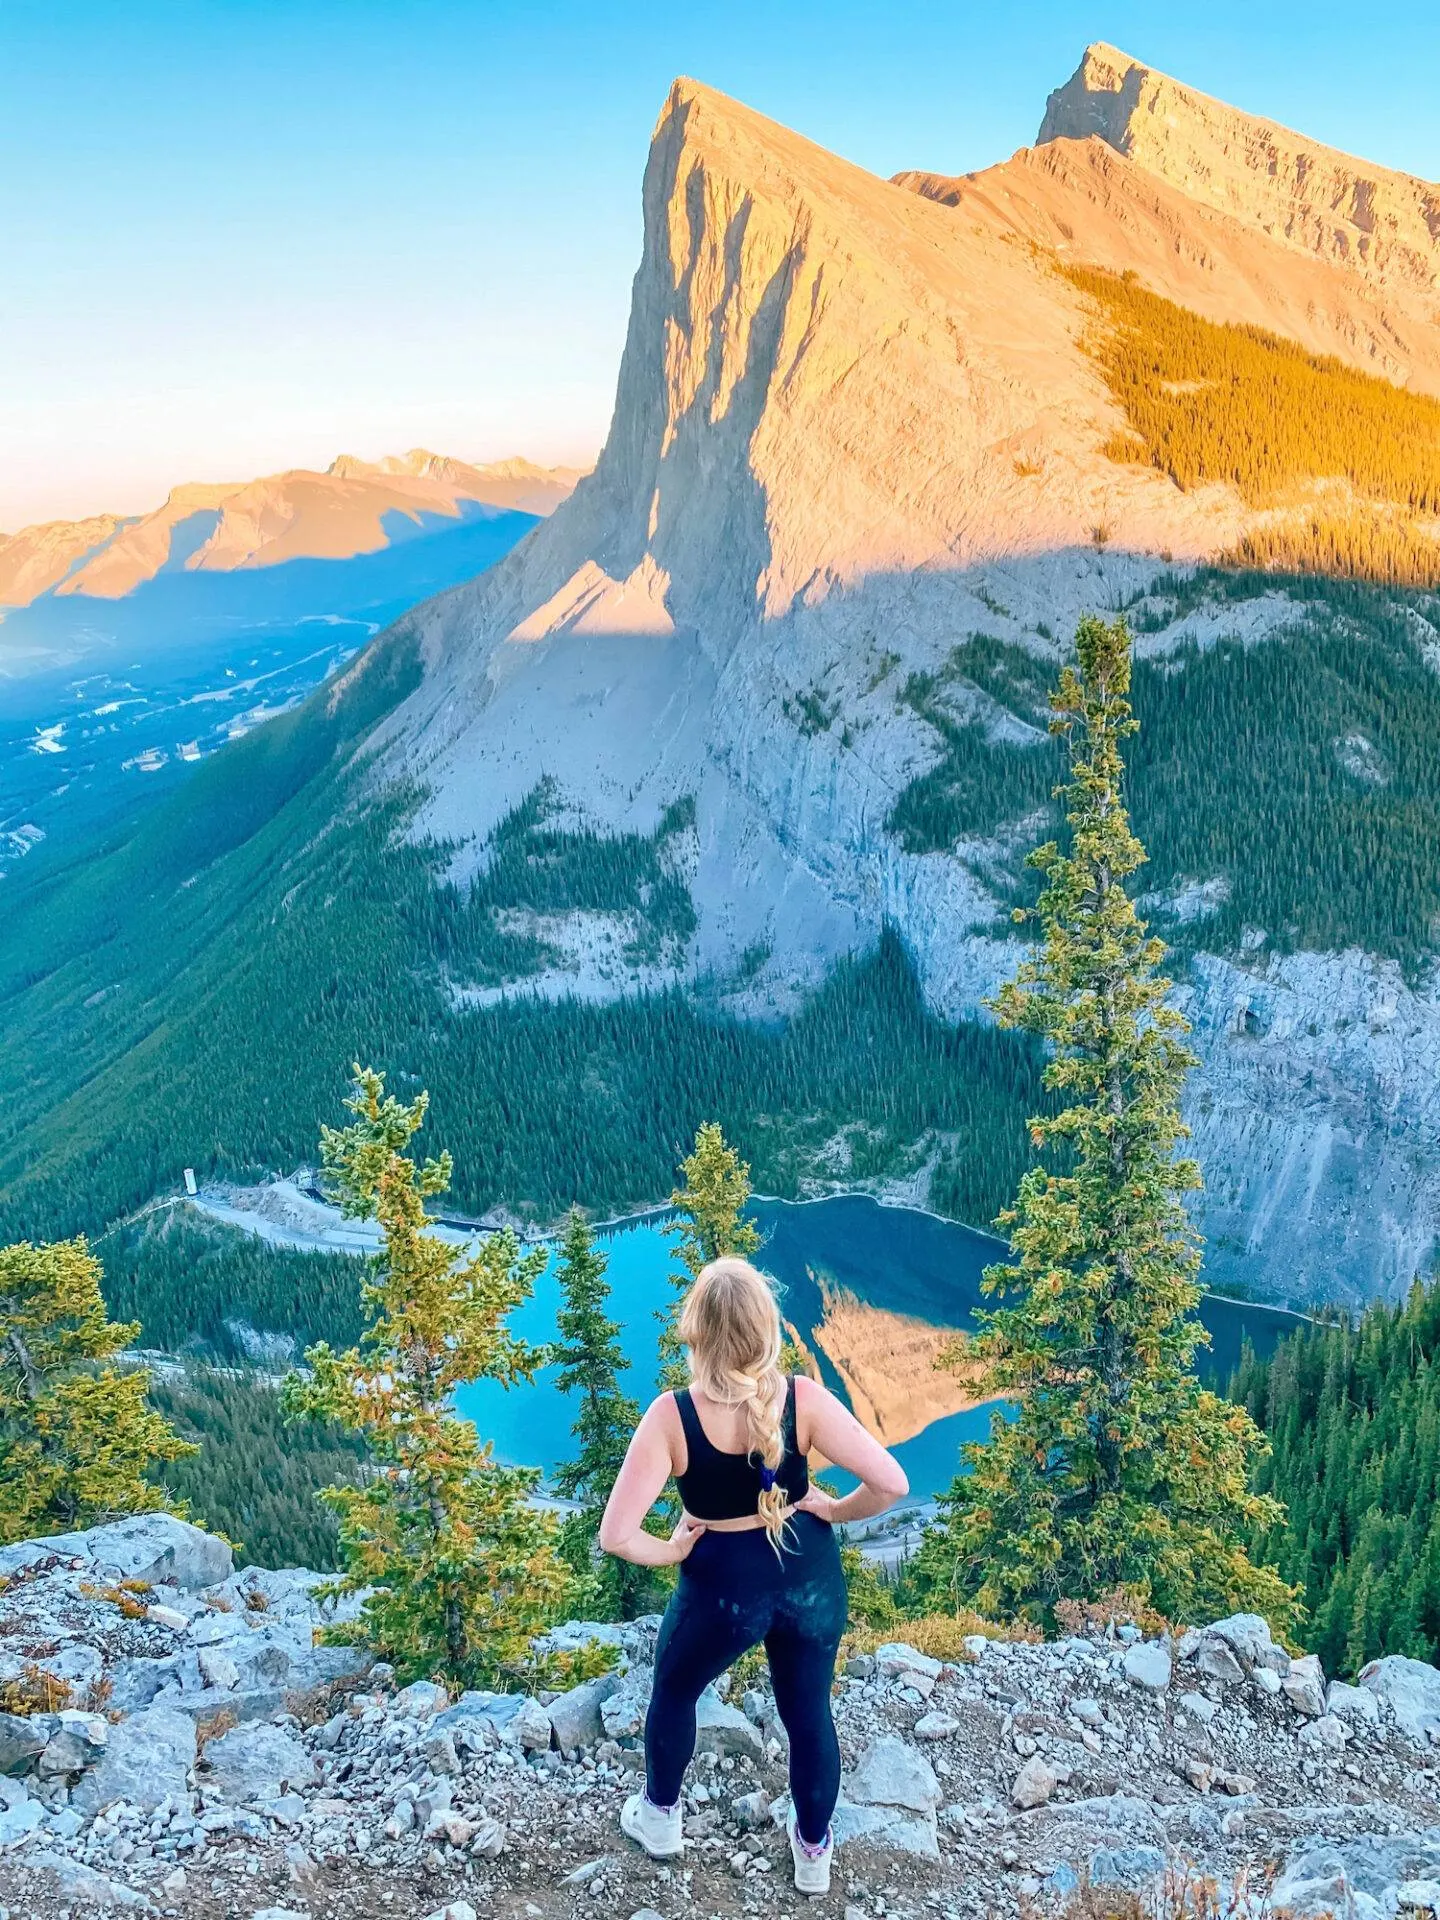 Visiting Banff National Park soon? Don't miss this guide of the 50 best things to in Banff for every kind of traveler! I recently spent 8 days exploring the area and took notes along the way so I could write you the most comprehensive guide possible. This guide includes all the top attractions, hikes, restaurants, and sights you definitely won't want to miss when you visit Banff National Park. I also include any tips you might need when visiting the area! Pictured here: Hike the East End of Rundle hike for incredible views